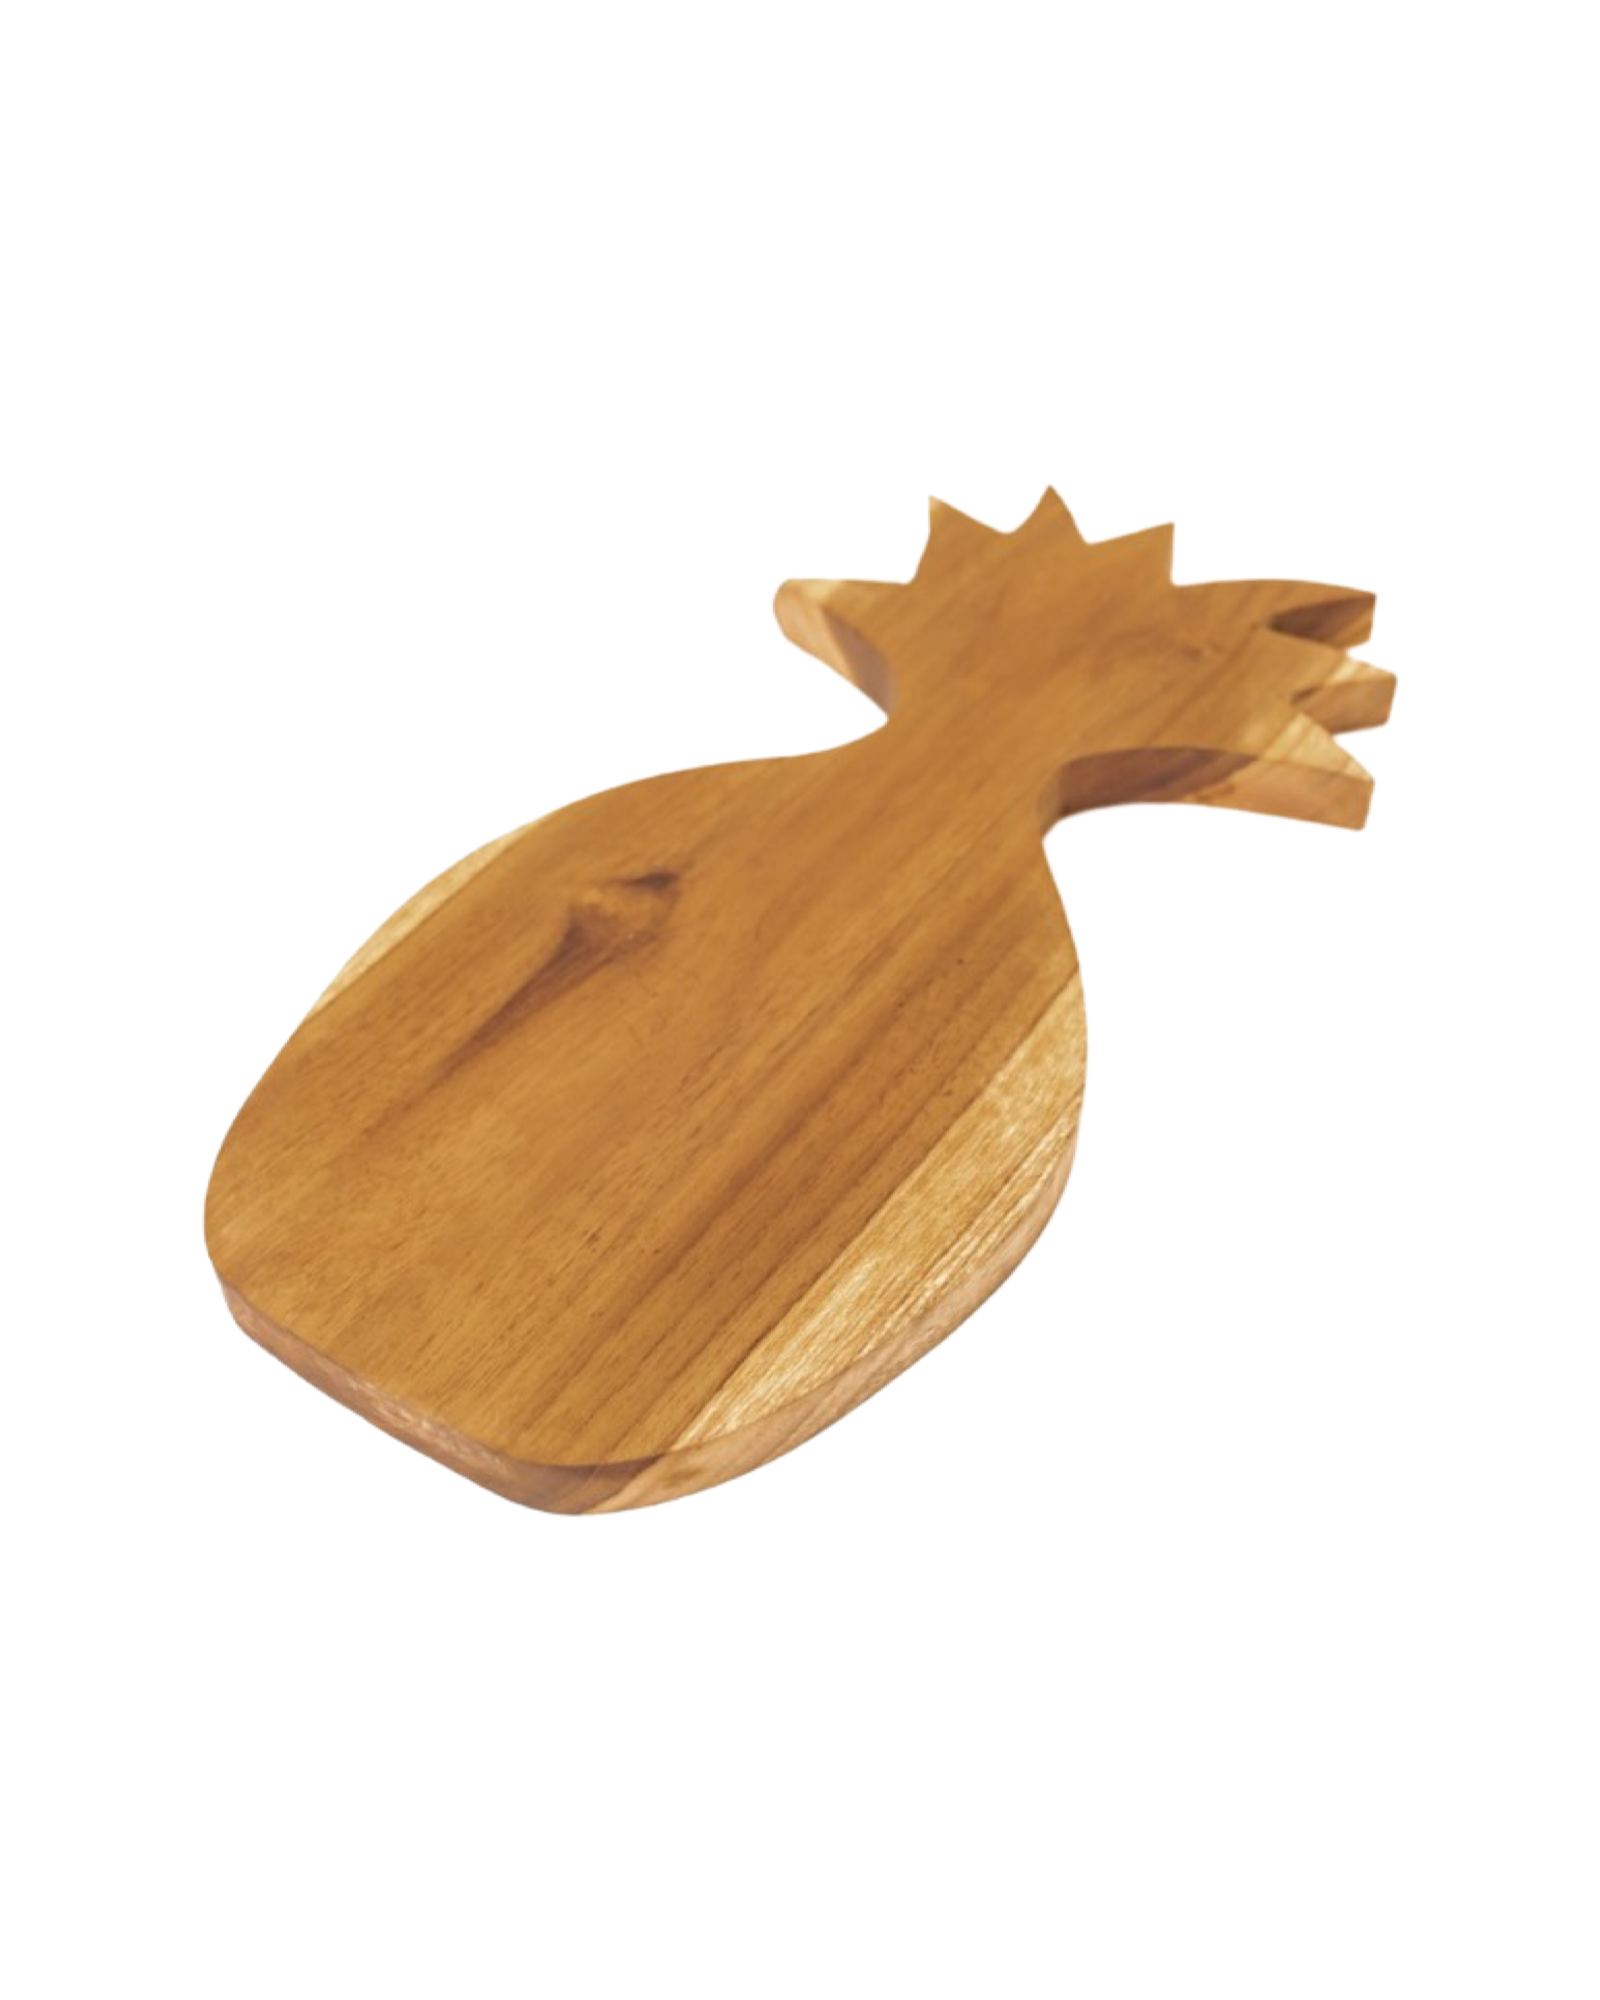 A wooden teak serving board shaped into a pineapple